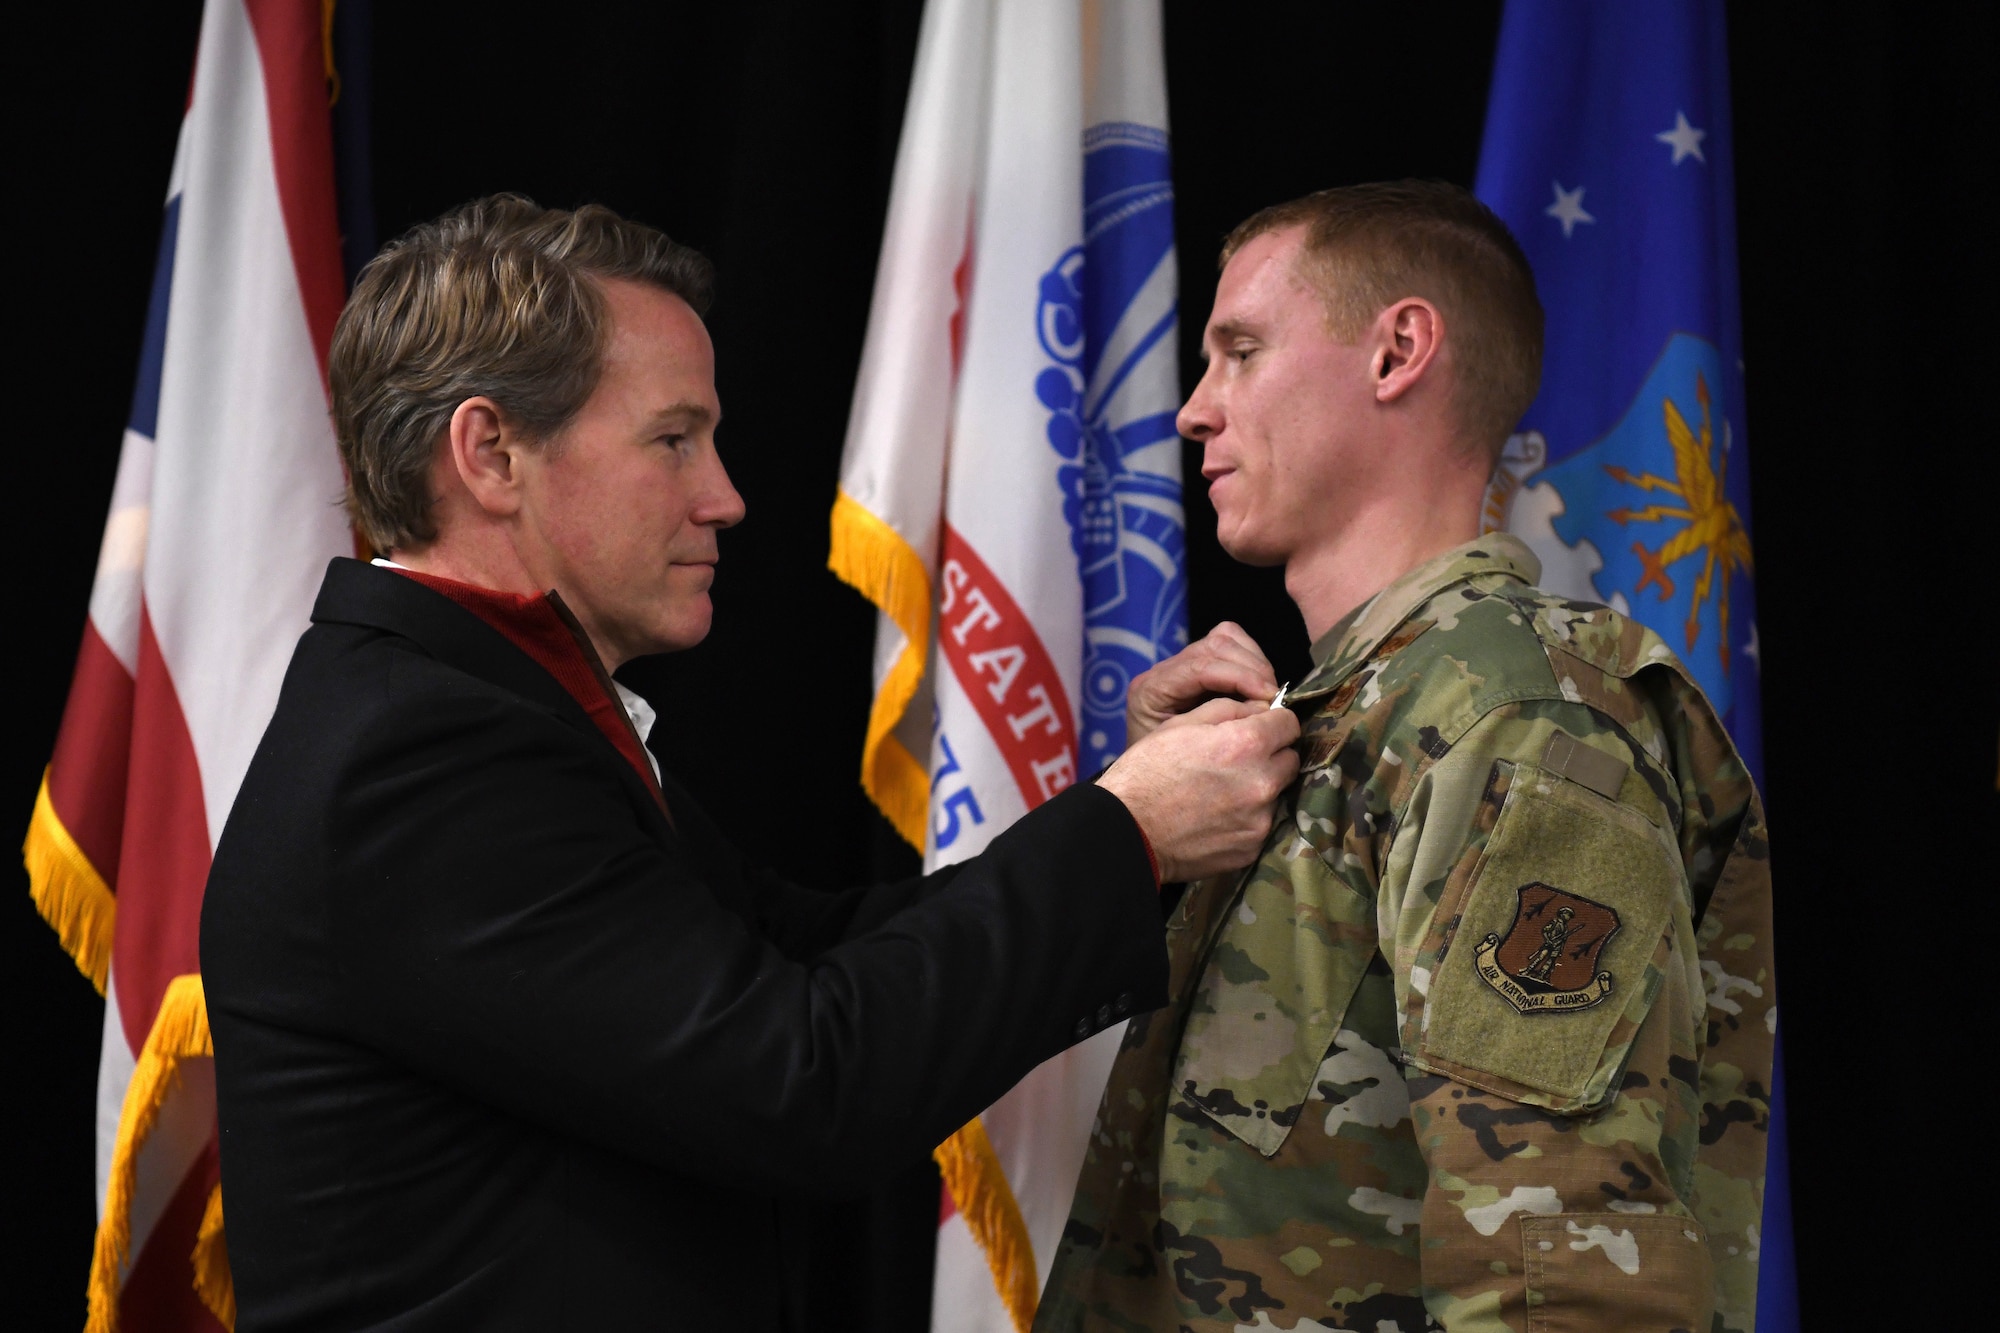 Ohio’s Lt. Governor Jon Husted awards the Ohio Cross to U.S. Air Force Master Sgt. Ryan Tucker during the Ohio National Guard’s Joint Senior Leaders Conference Feb. 14, 2020 in Columbus, Ohio. The Ohio Cross is awarded to any member of the state military forces who distinguishes themselves by gallantry and intrepidity at the risk of their life. (U.S. Air Force photo by Tech. Sgt. Shane Hughes)